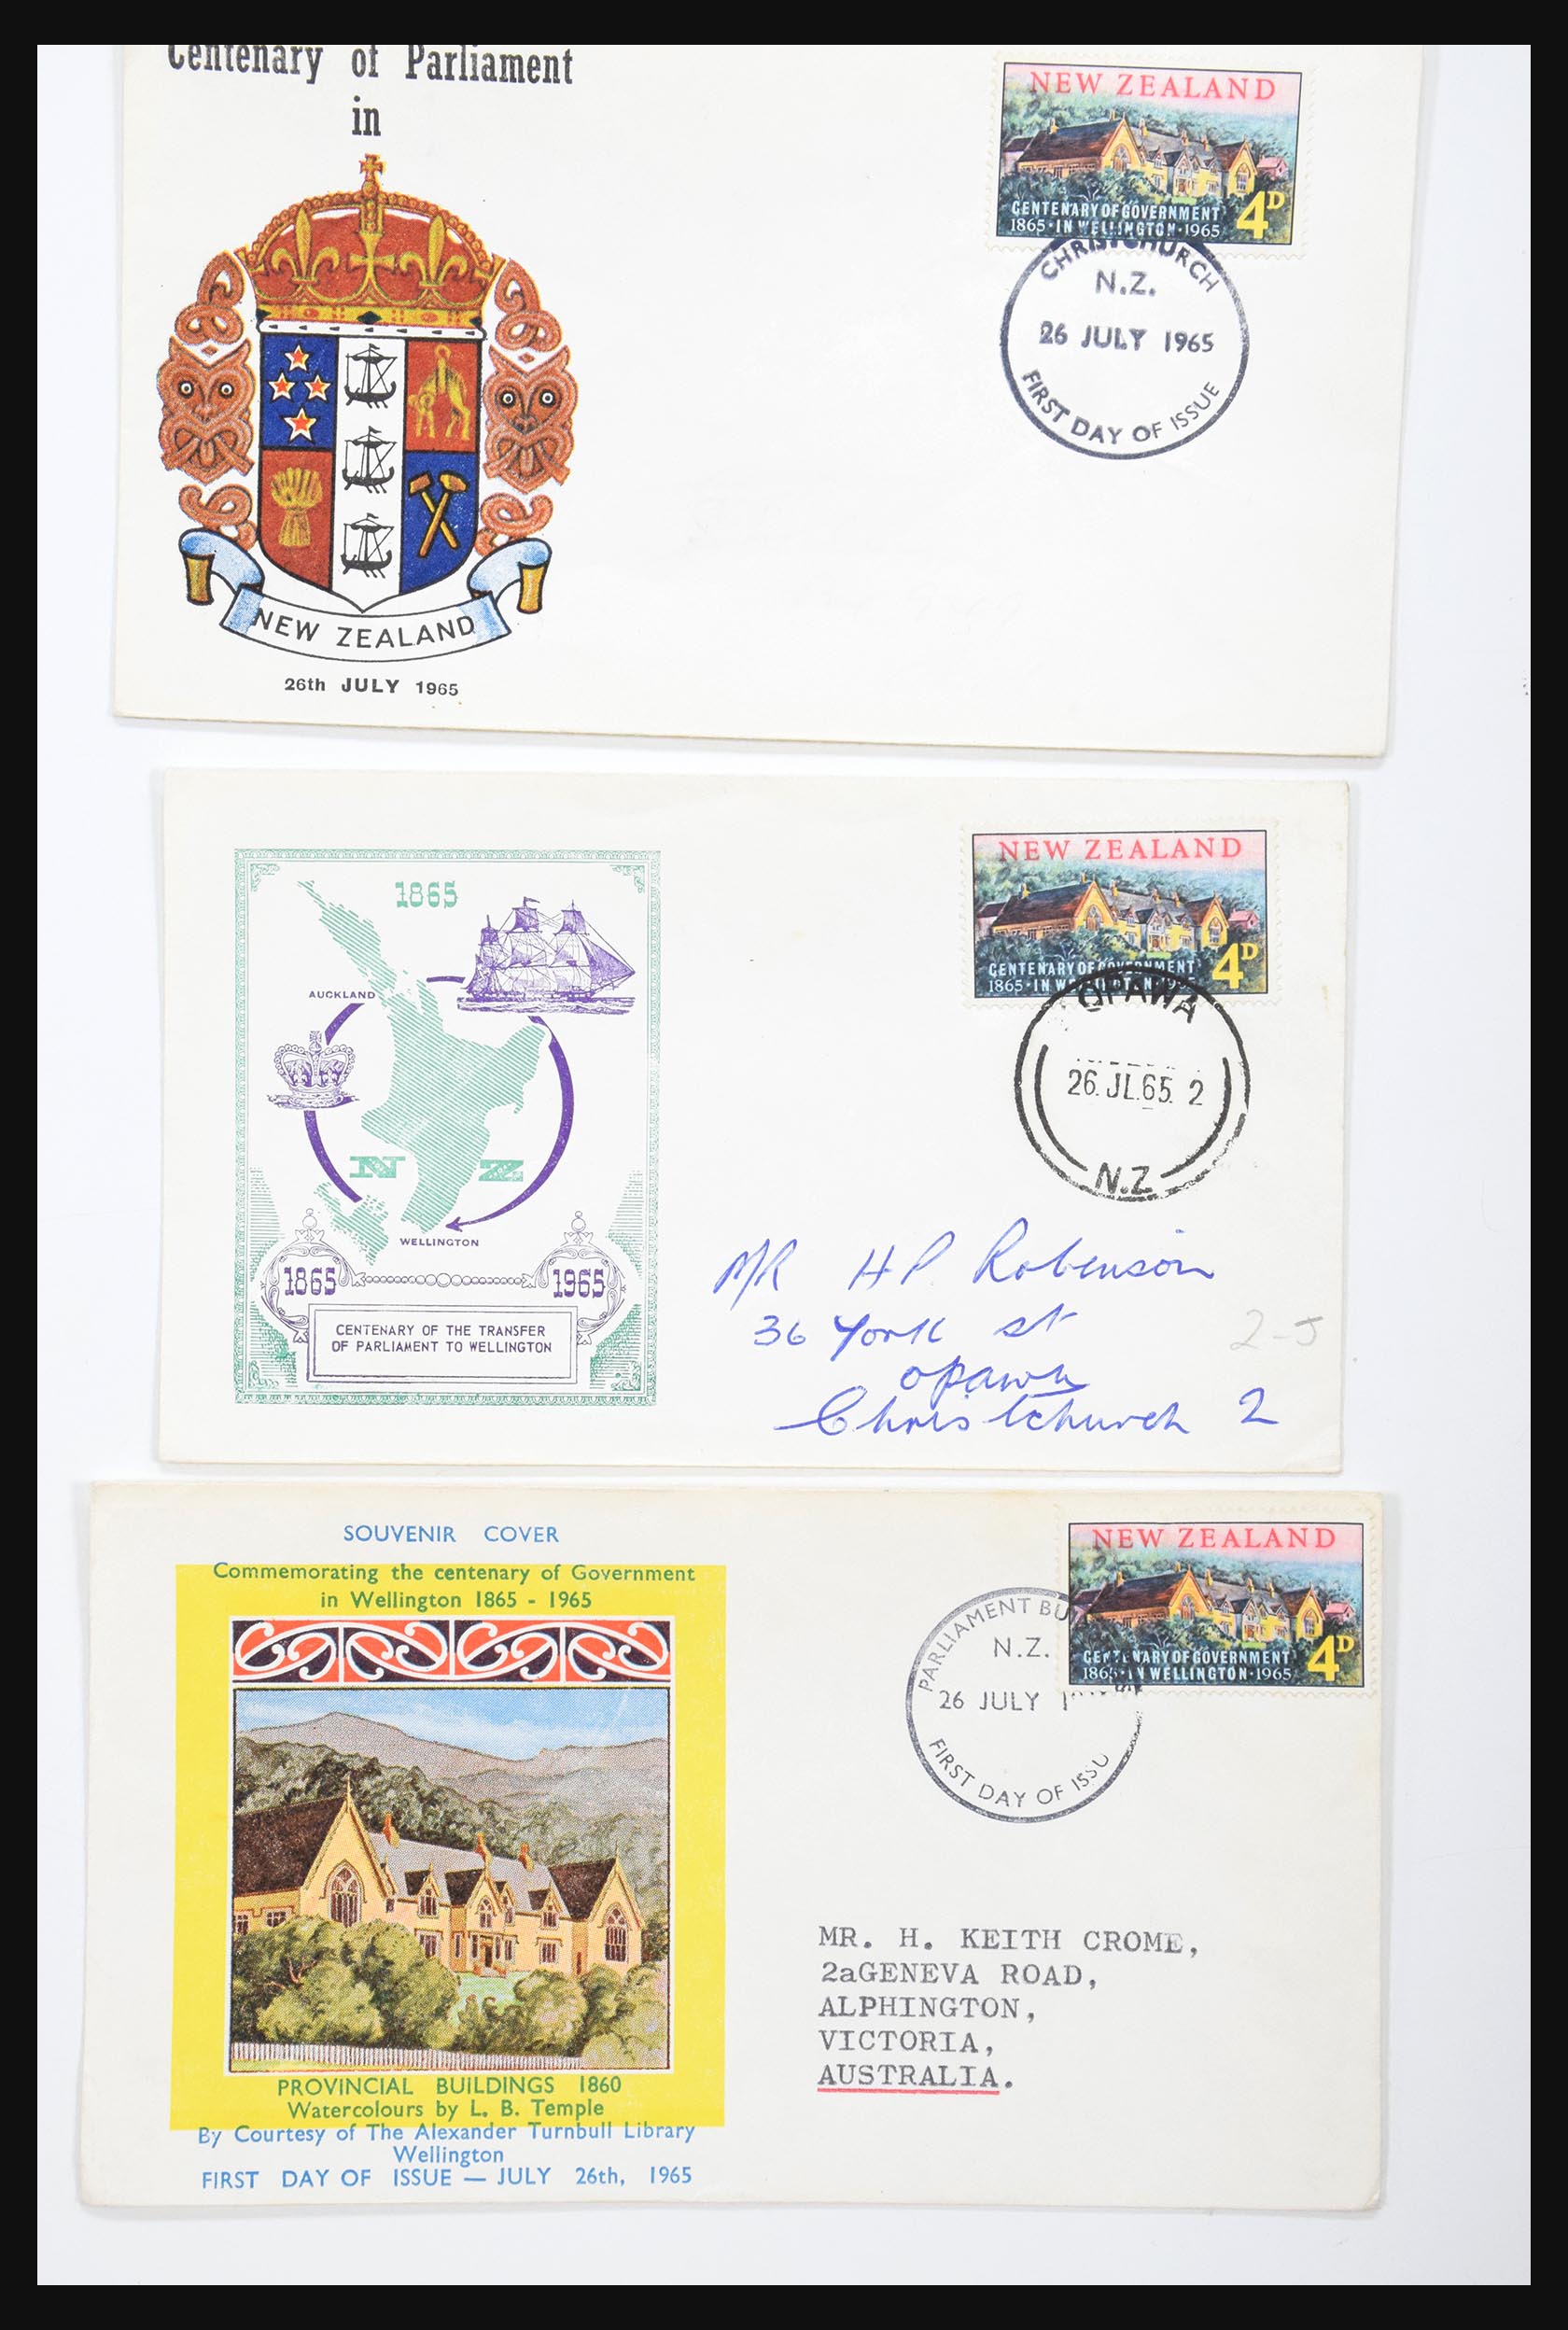 30821 081 - 30821 New Zealand FDC's 1960-1971.